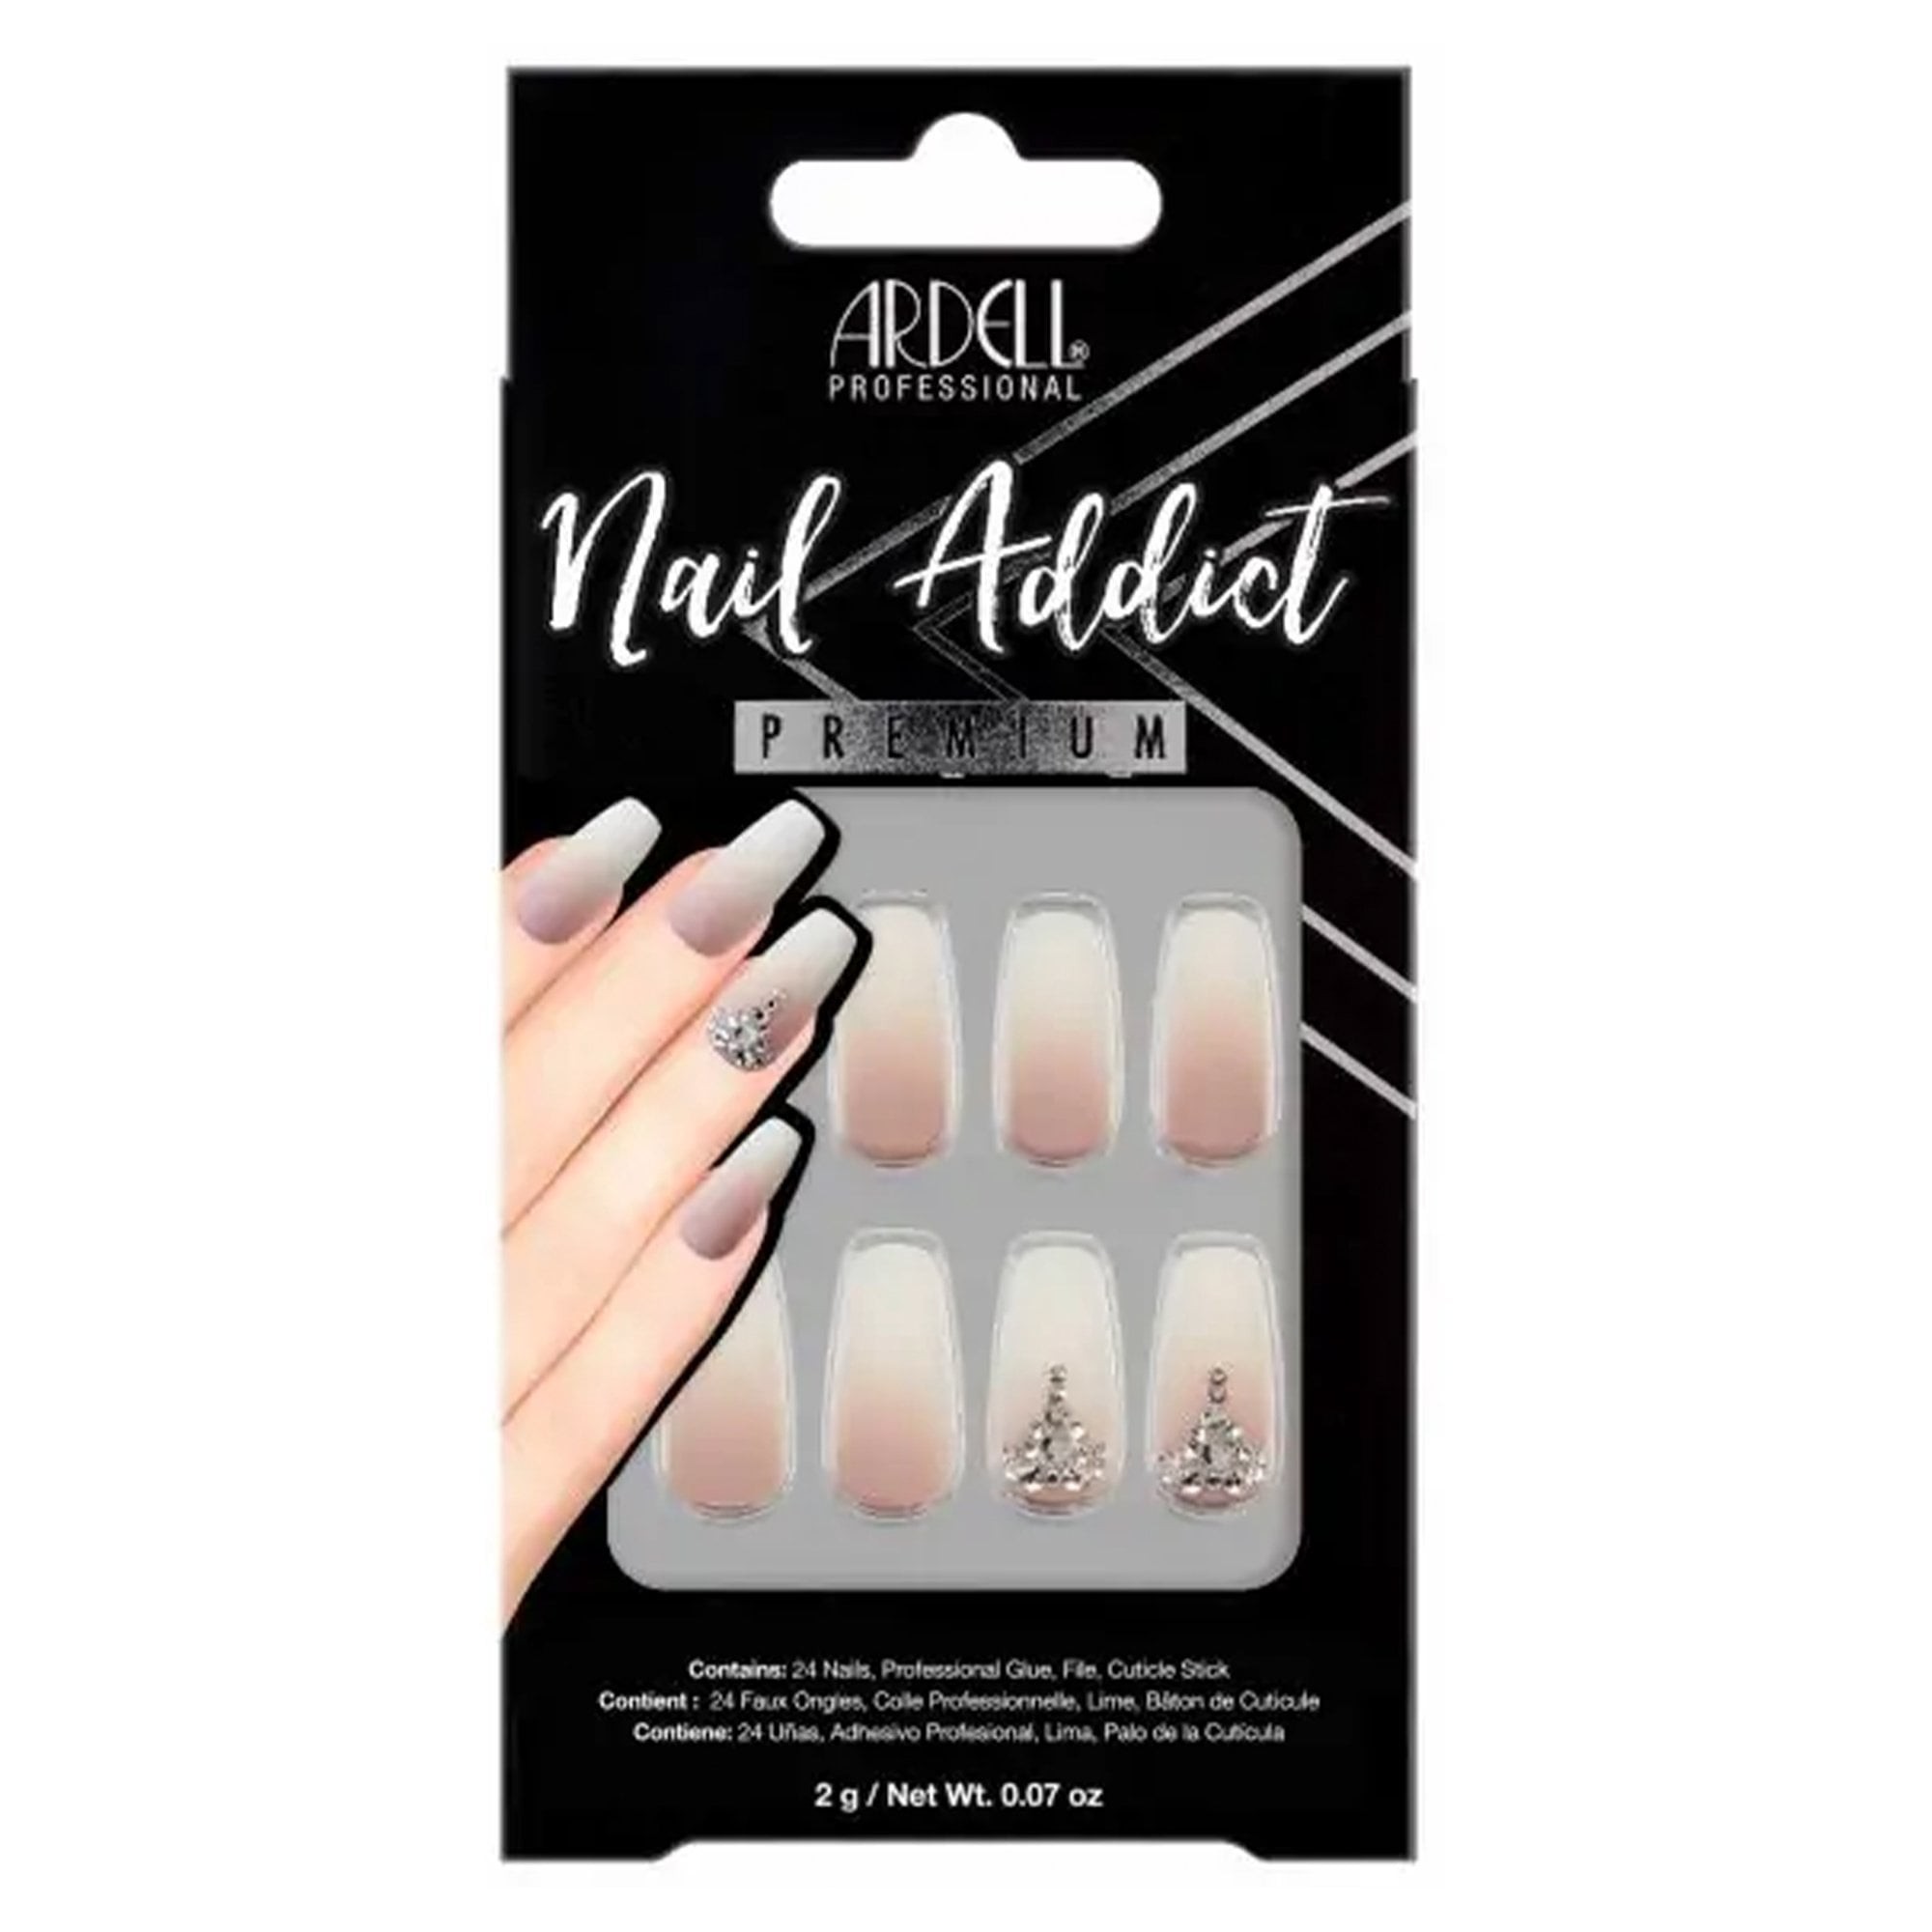 ARDELL NAIL ADDICT RICH TAN OMBRE - 54602